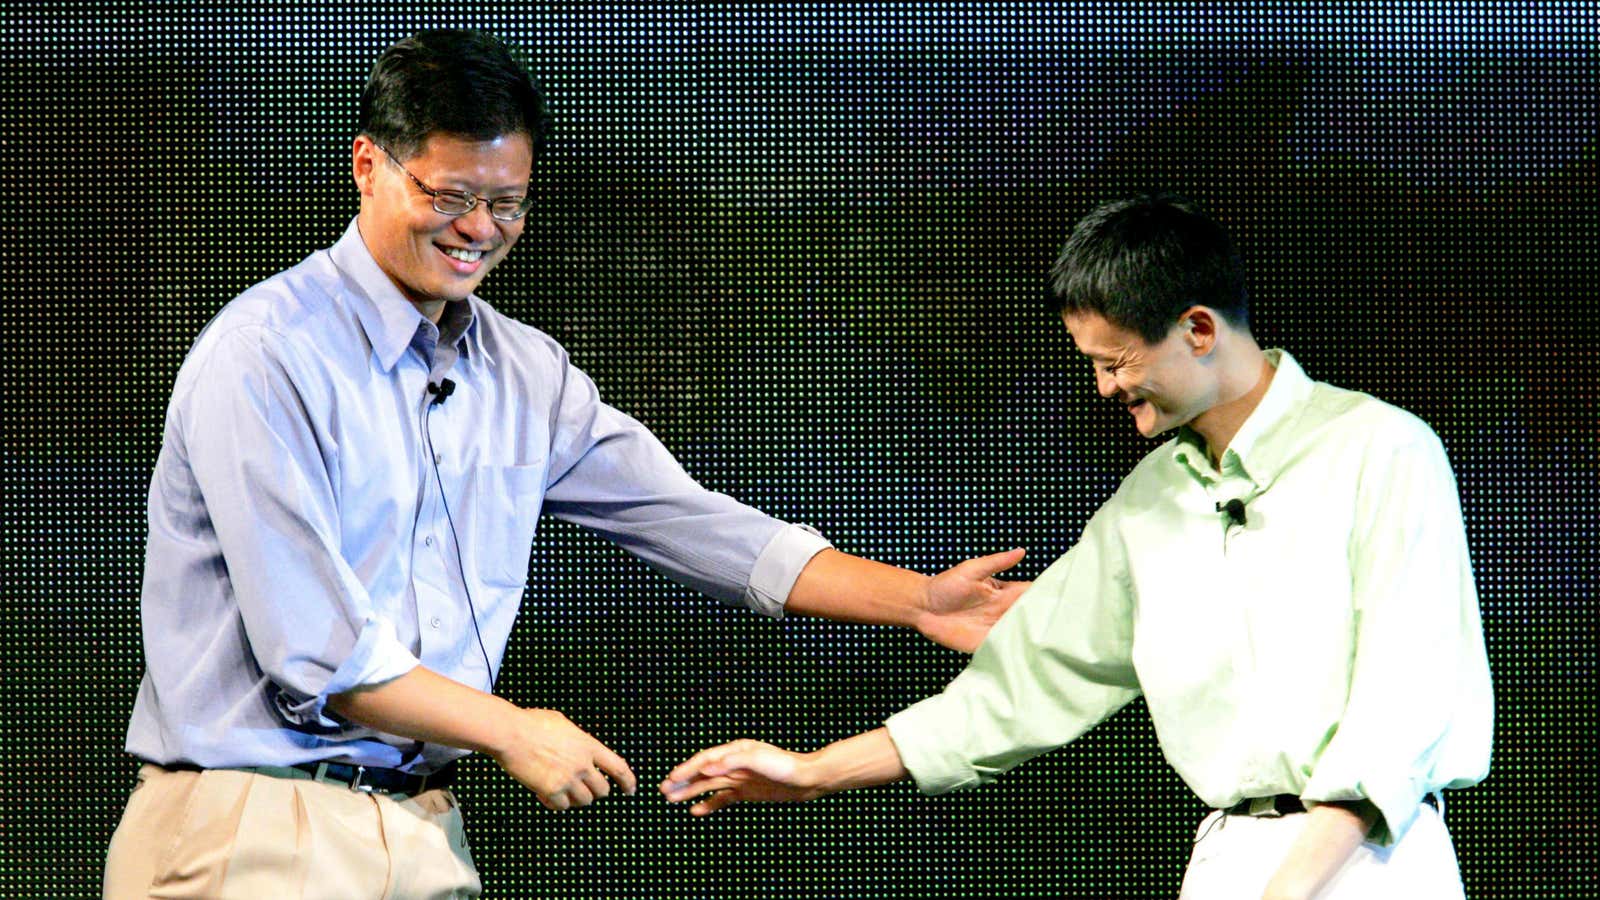 Yahoo’s Jerry Yang and Alibaba’s Jack Ma back in 2005.